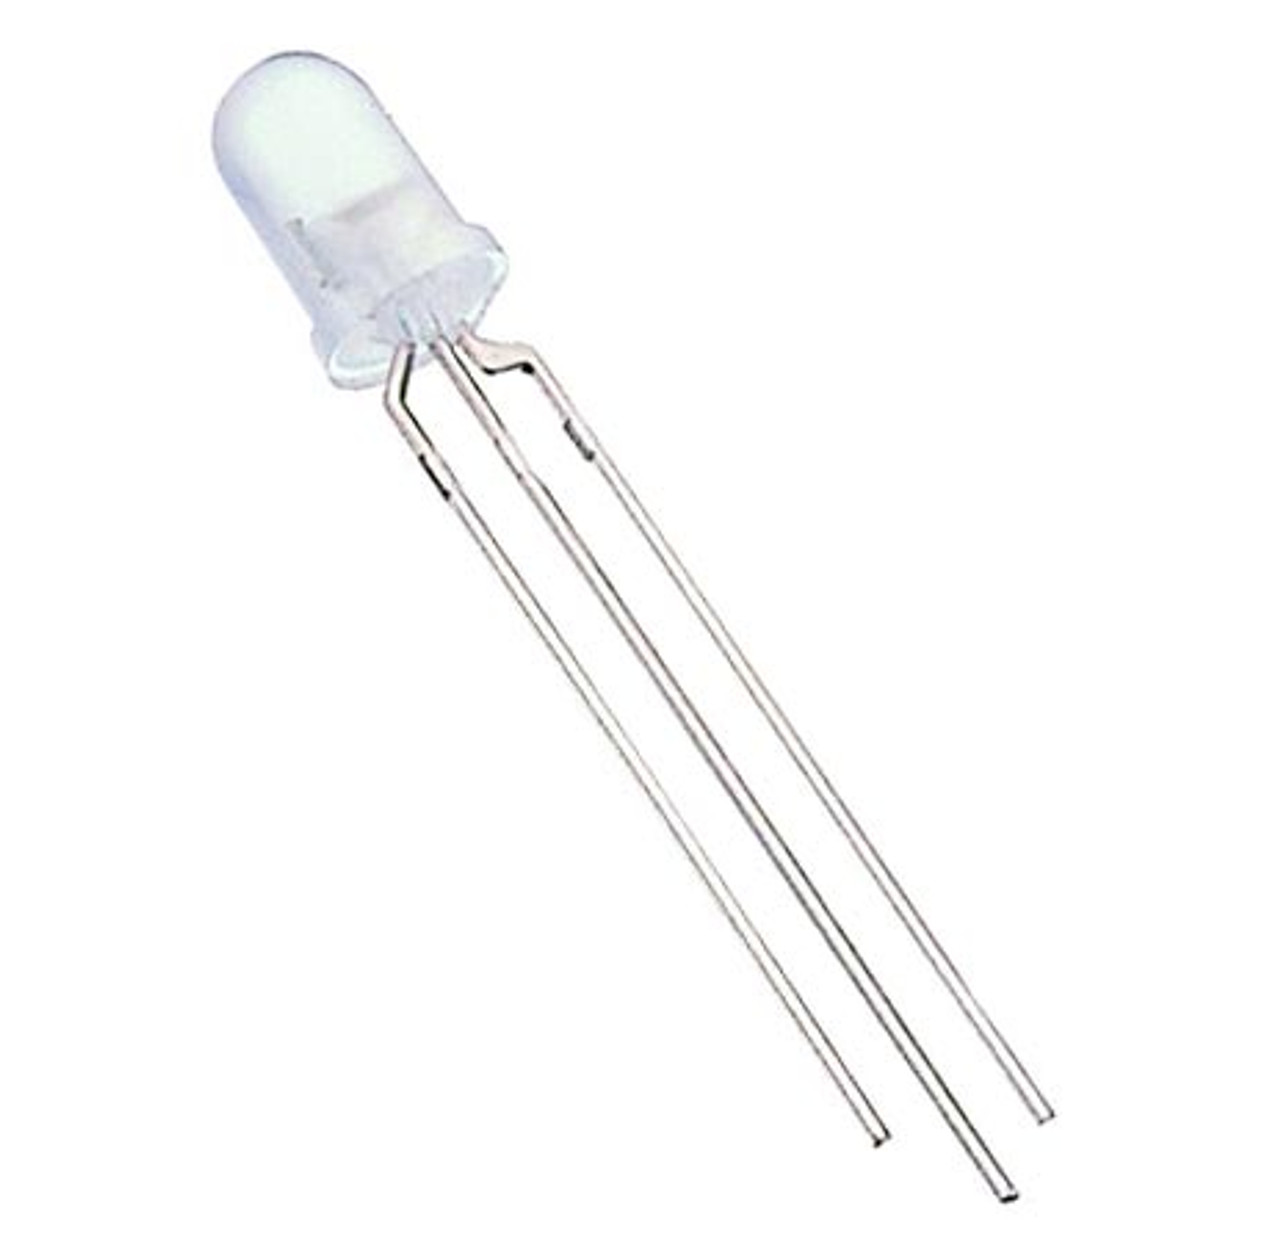 5mm Red And Blue Bi-Color LED Common Cathode - Diffused   Sharvielectronics: Best Online Electronic Products Bangalore